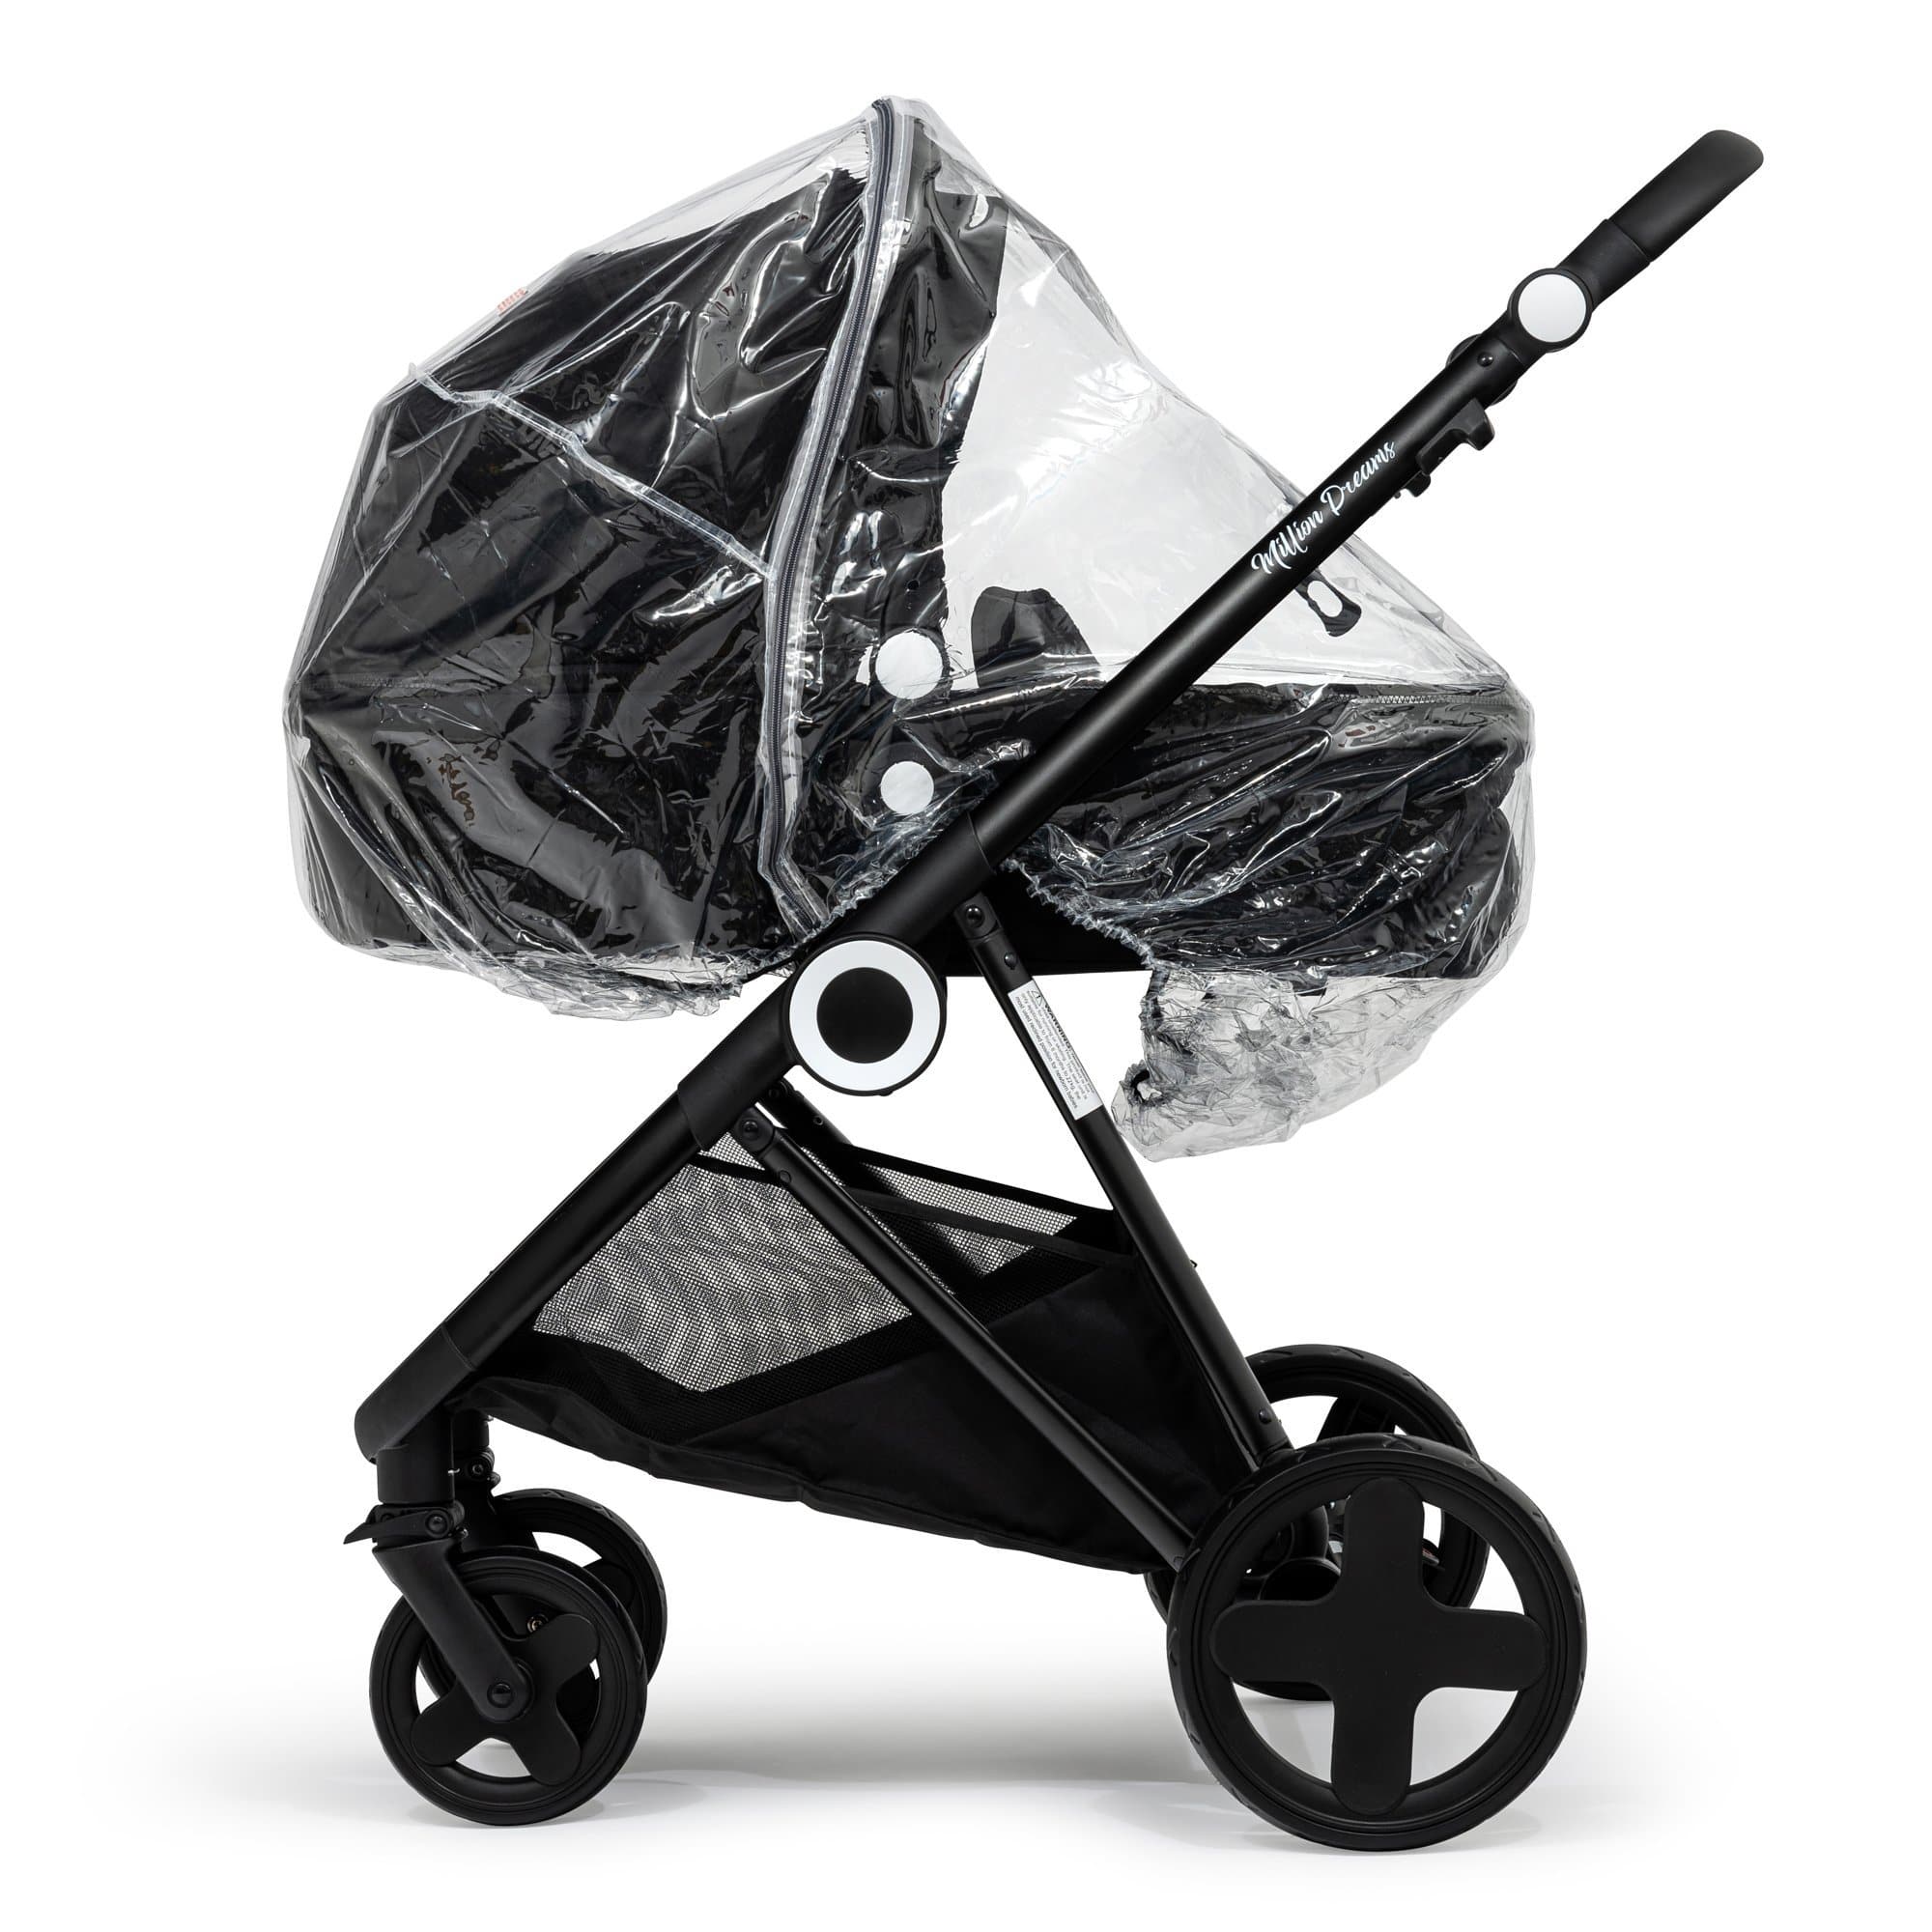 2 in 1 Rain Cover Compatible with BOB - Fits All Models - For Your Little One